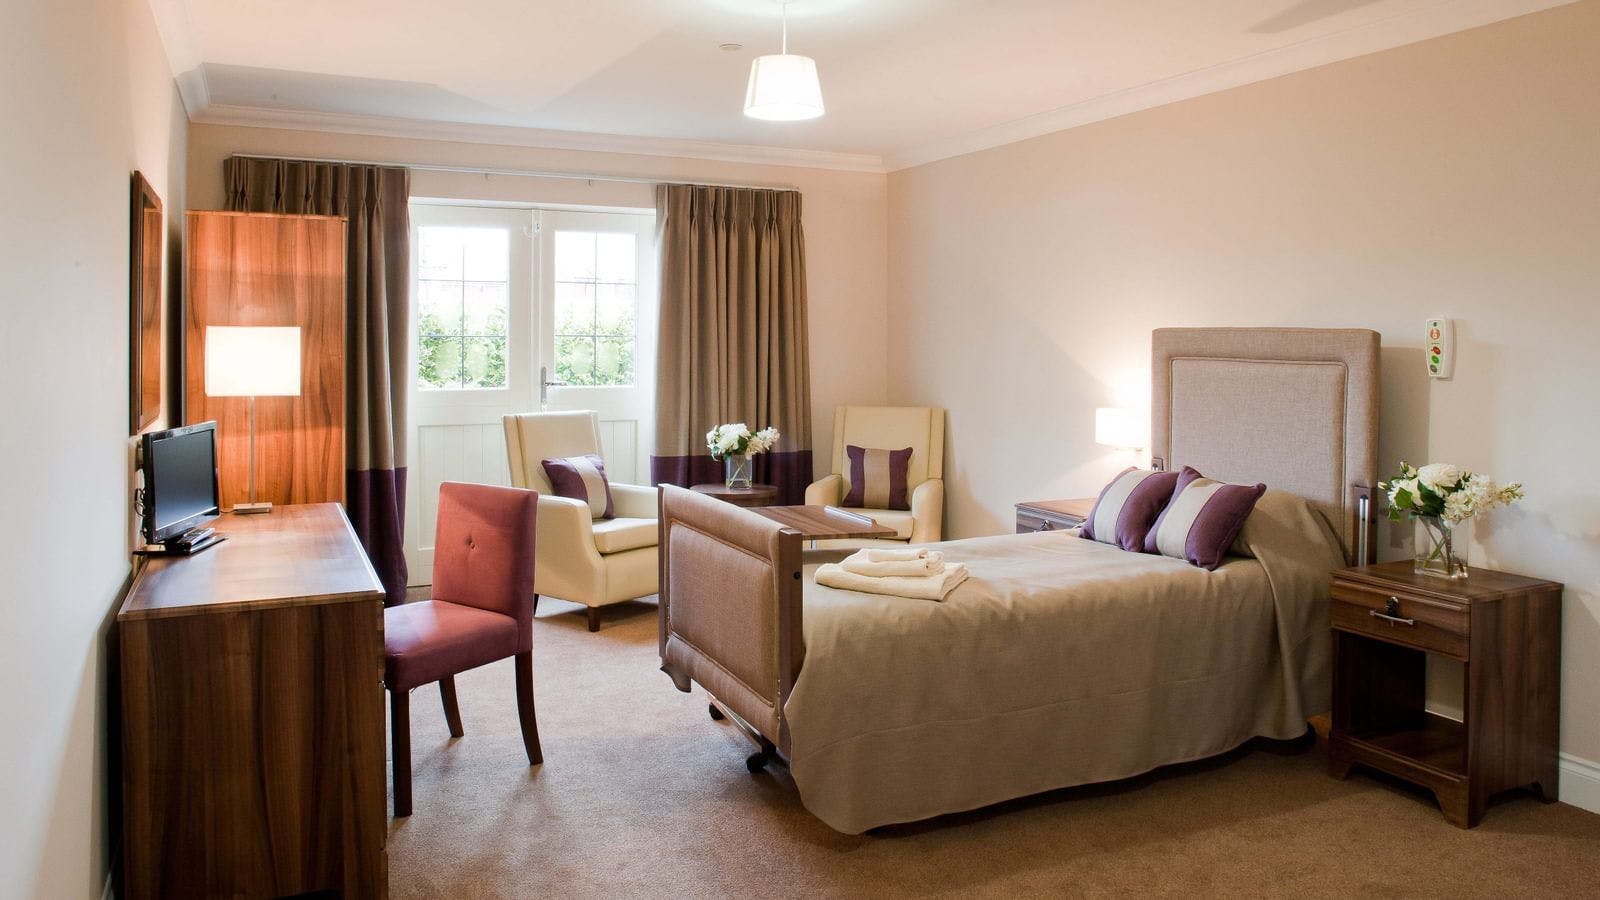 Bedroom at Homefield Grange Care Home in Christchurch, Dorset